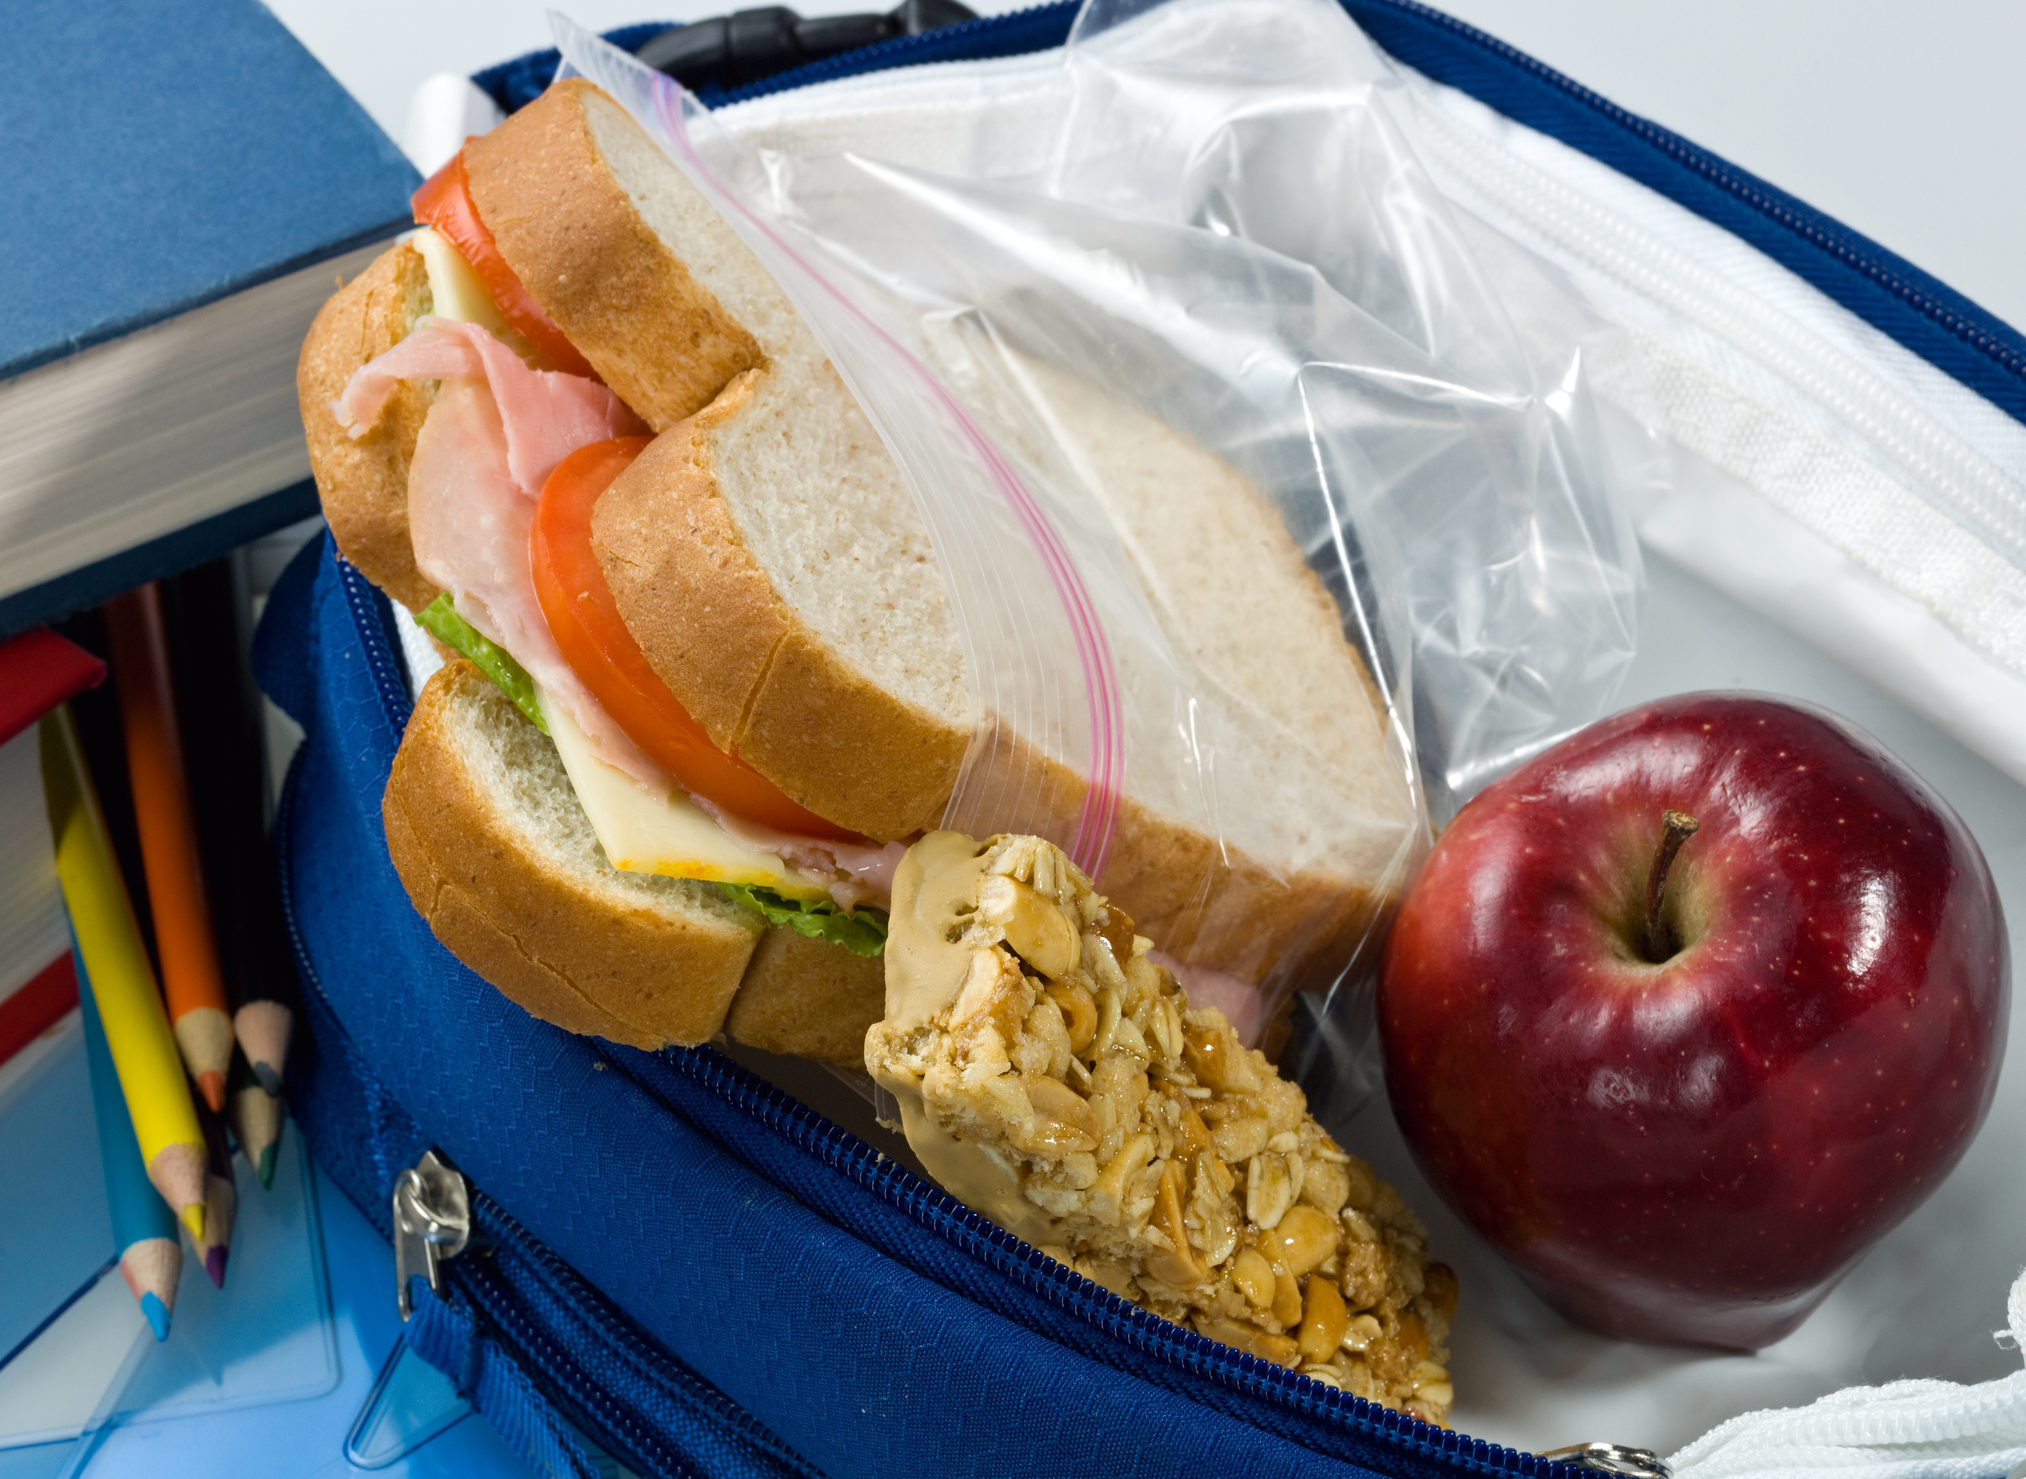 A packed lunch with a sandwich, granola bar, and apple.